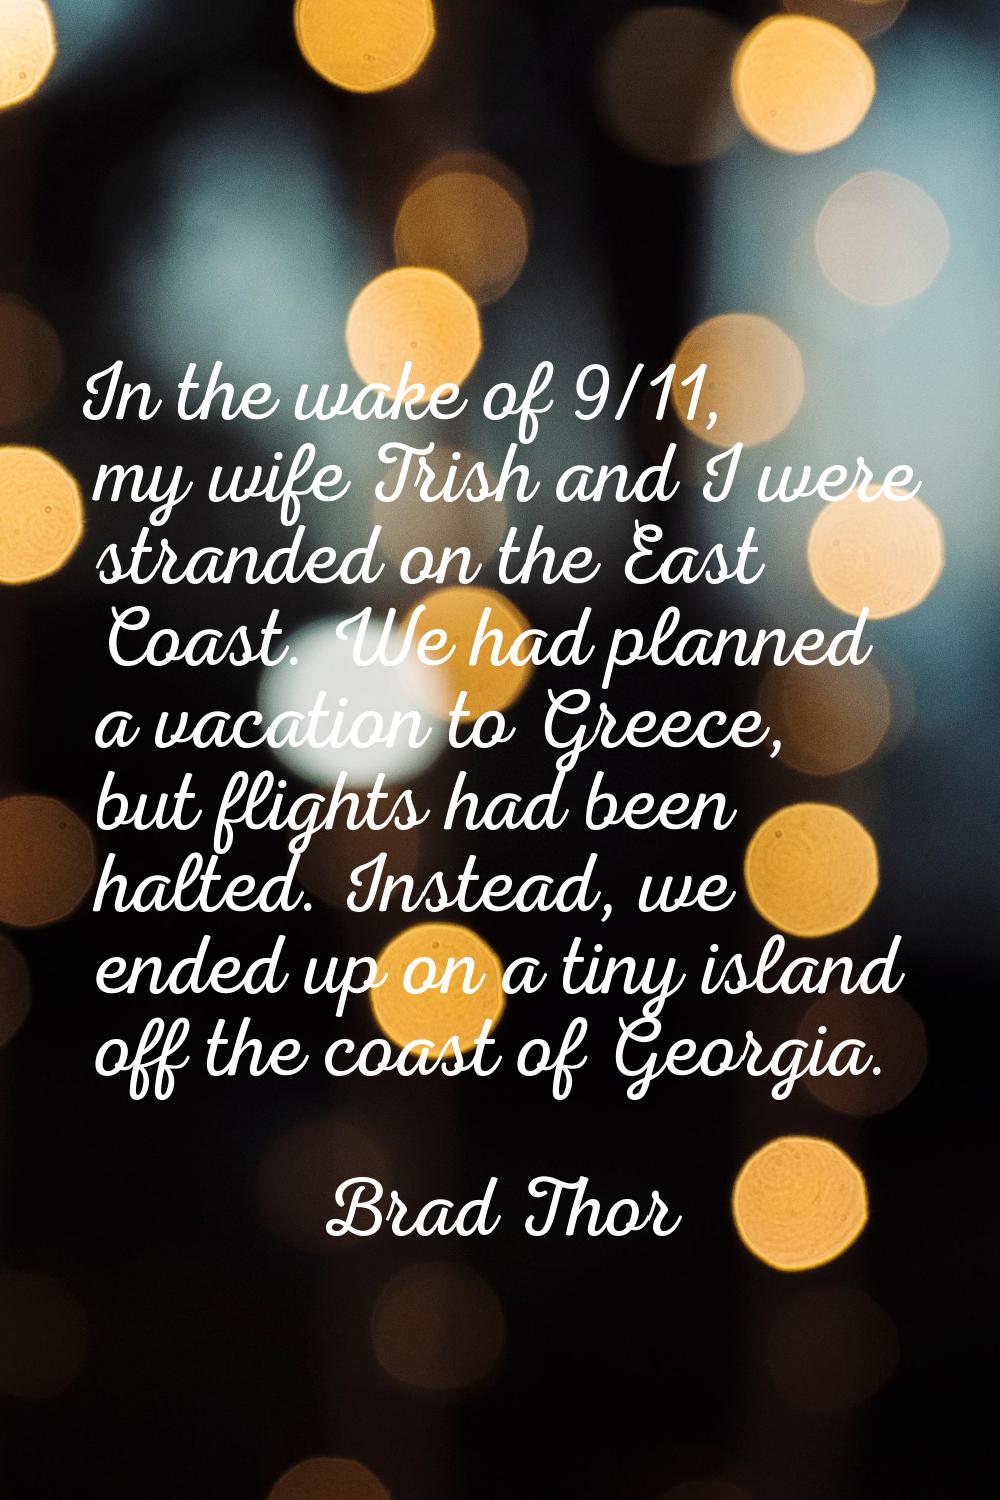 In the wake of 9/11, my wife Trish and I were stranded on the East Coast. We had planned a vacation